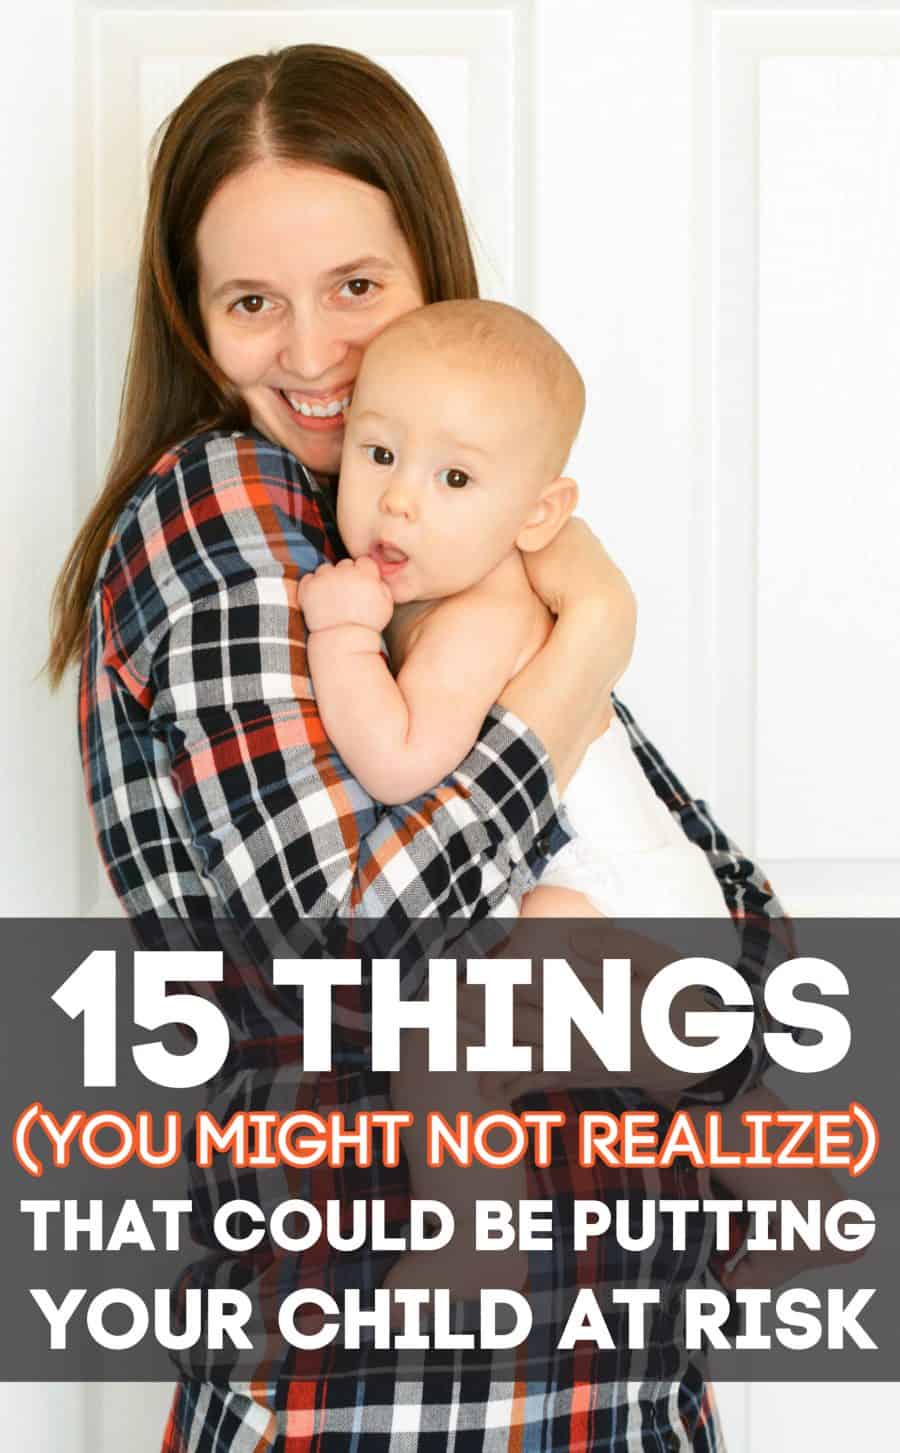 15 Things You Might Not Realize that Could Be Putting Your Child at Risk